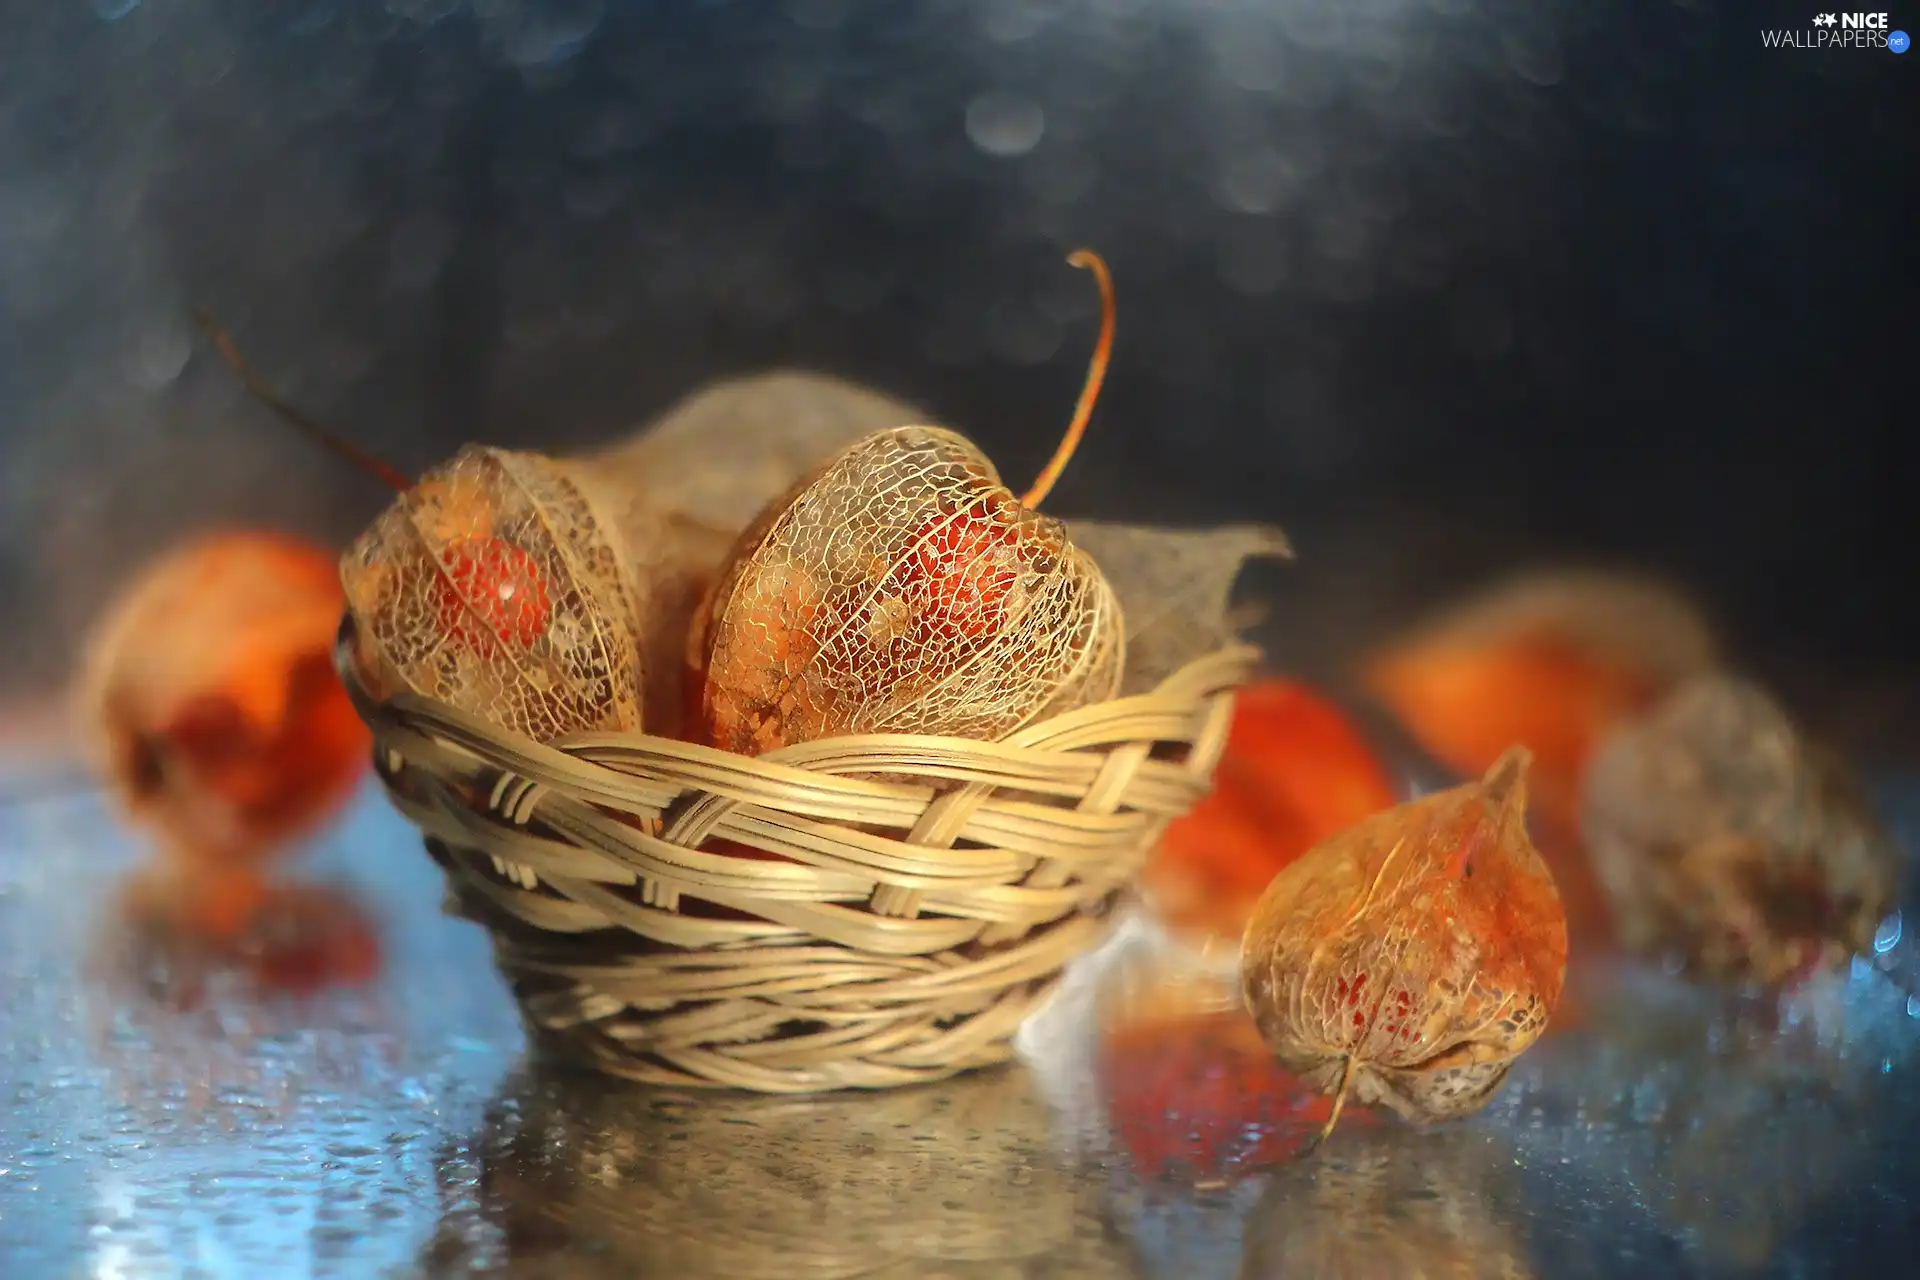 physalis bloated, Plants, basket, dry